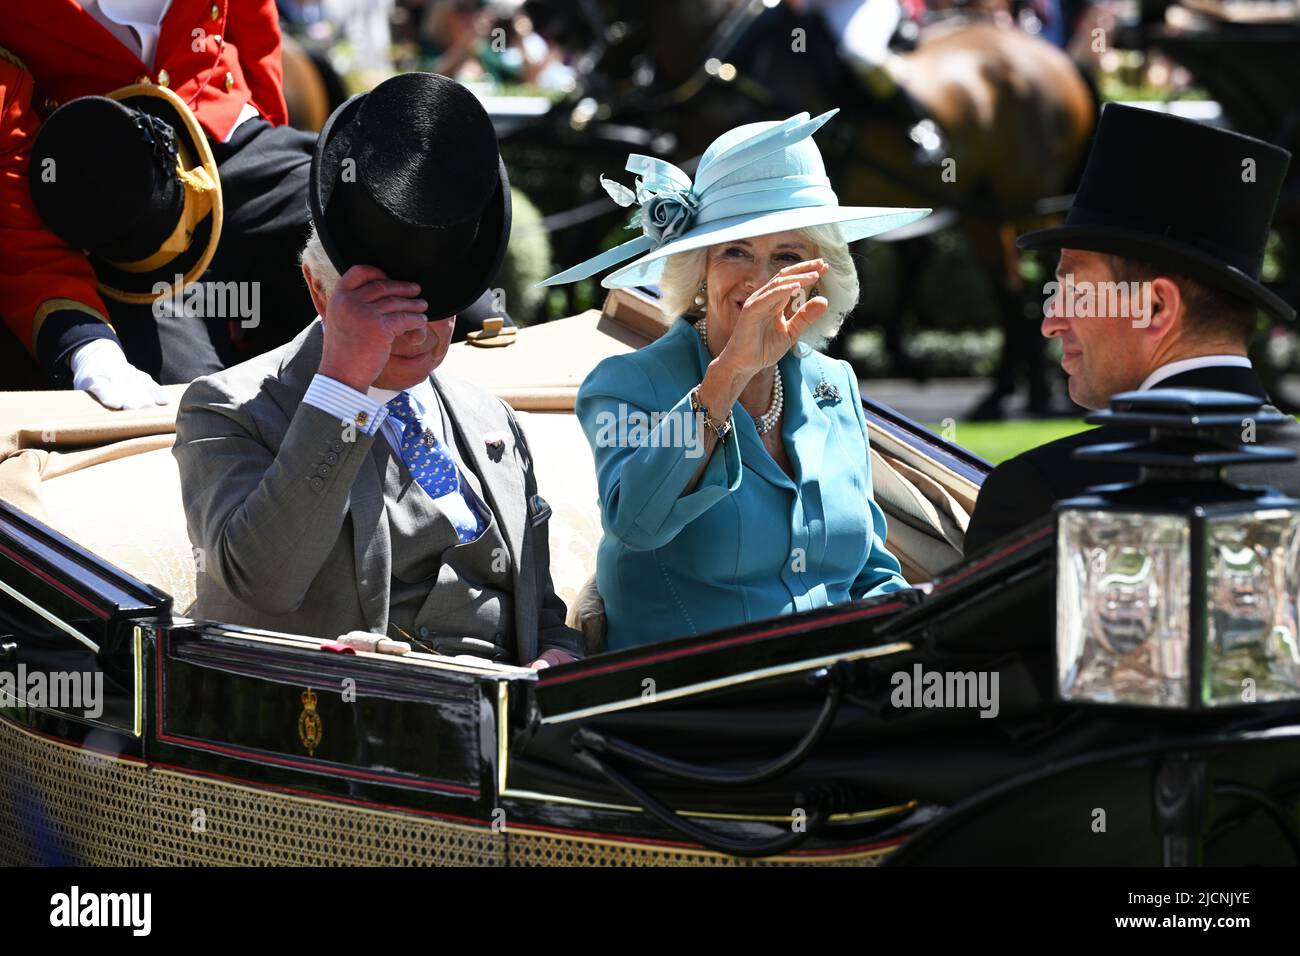 Ascot, UK. 14 June, 2022.  Prince Charles, Prince of Wales, Camilla, Duchess of Cambridge and Peter Phillips arrive in an open carriage during the first day of Royal Ascot 2022 in Ascot, England. Credit: Anwar Hussein Credit: Anwar Hussein/Alamy Live News Stock Photo